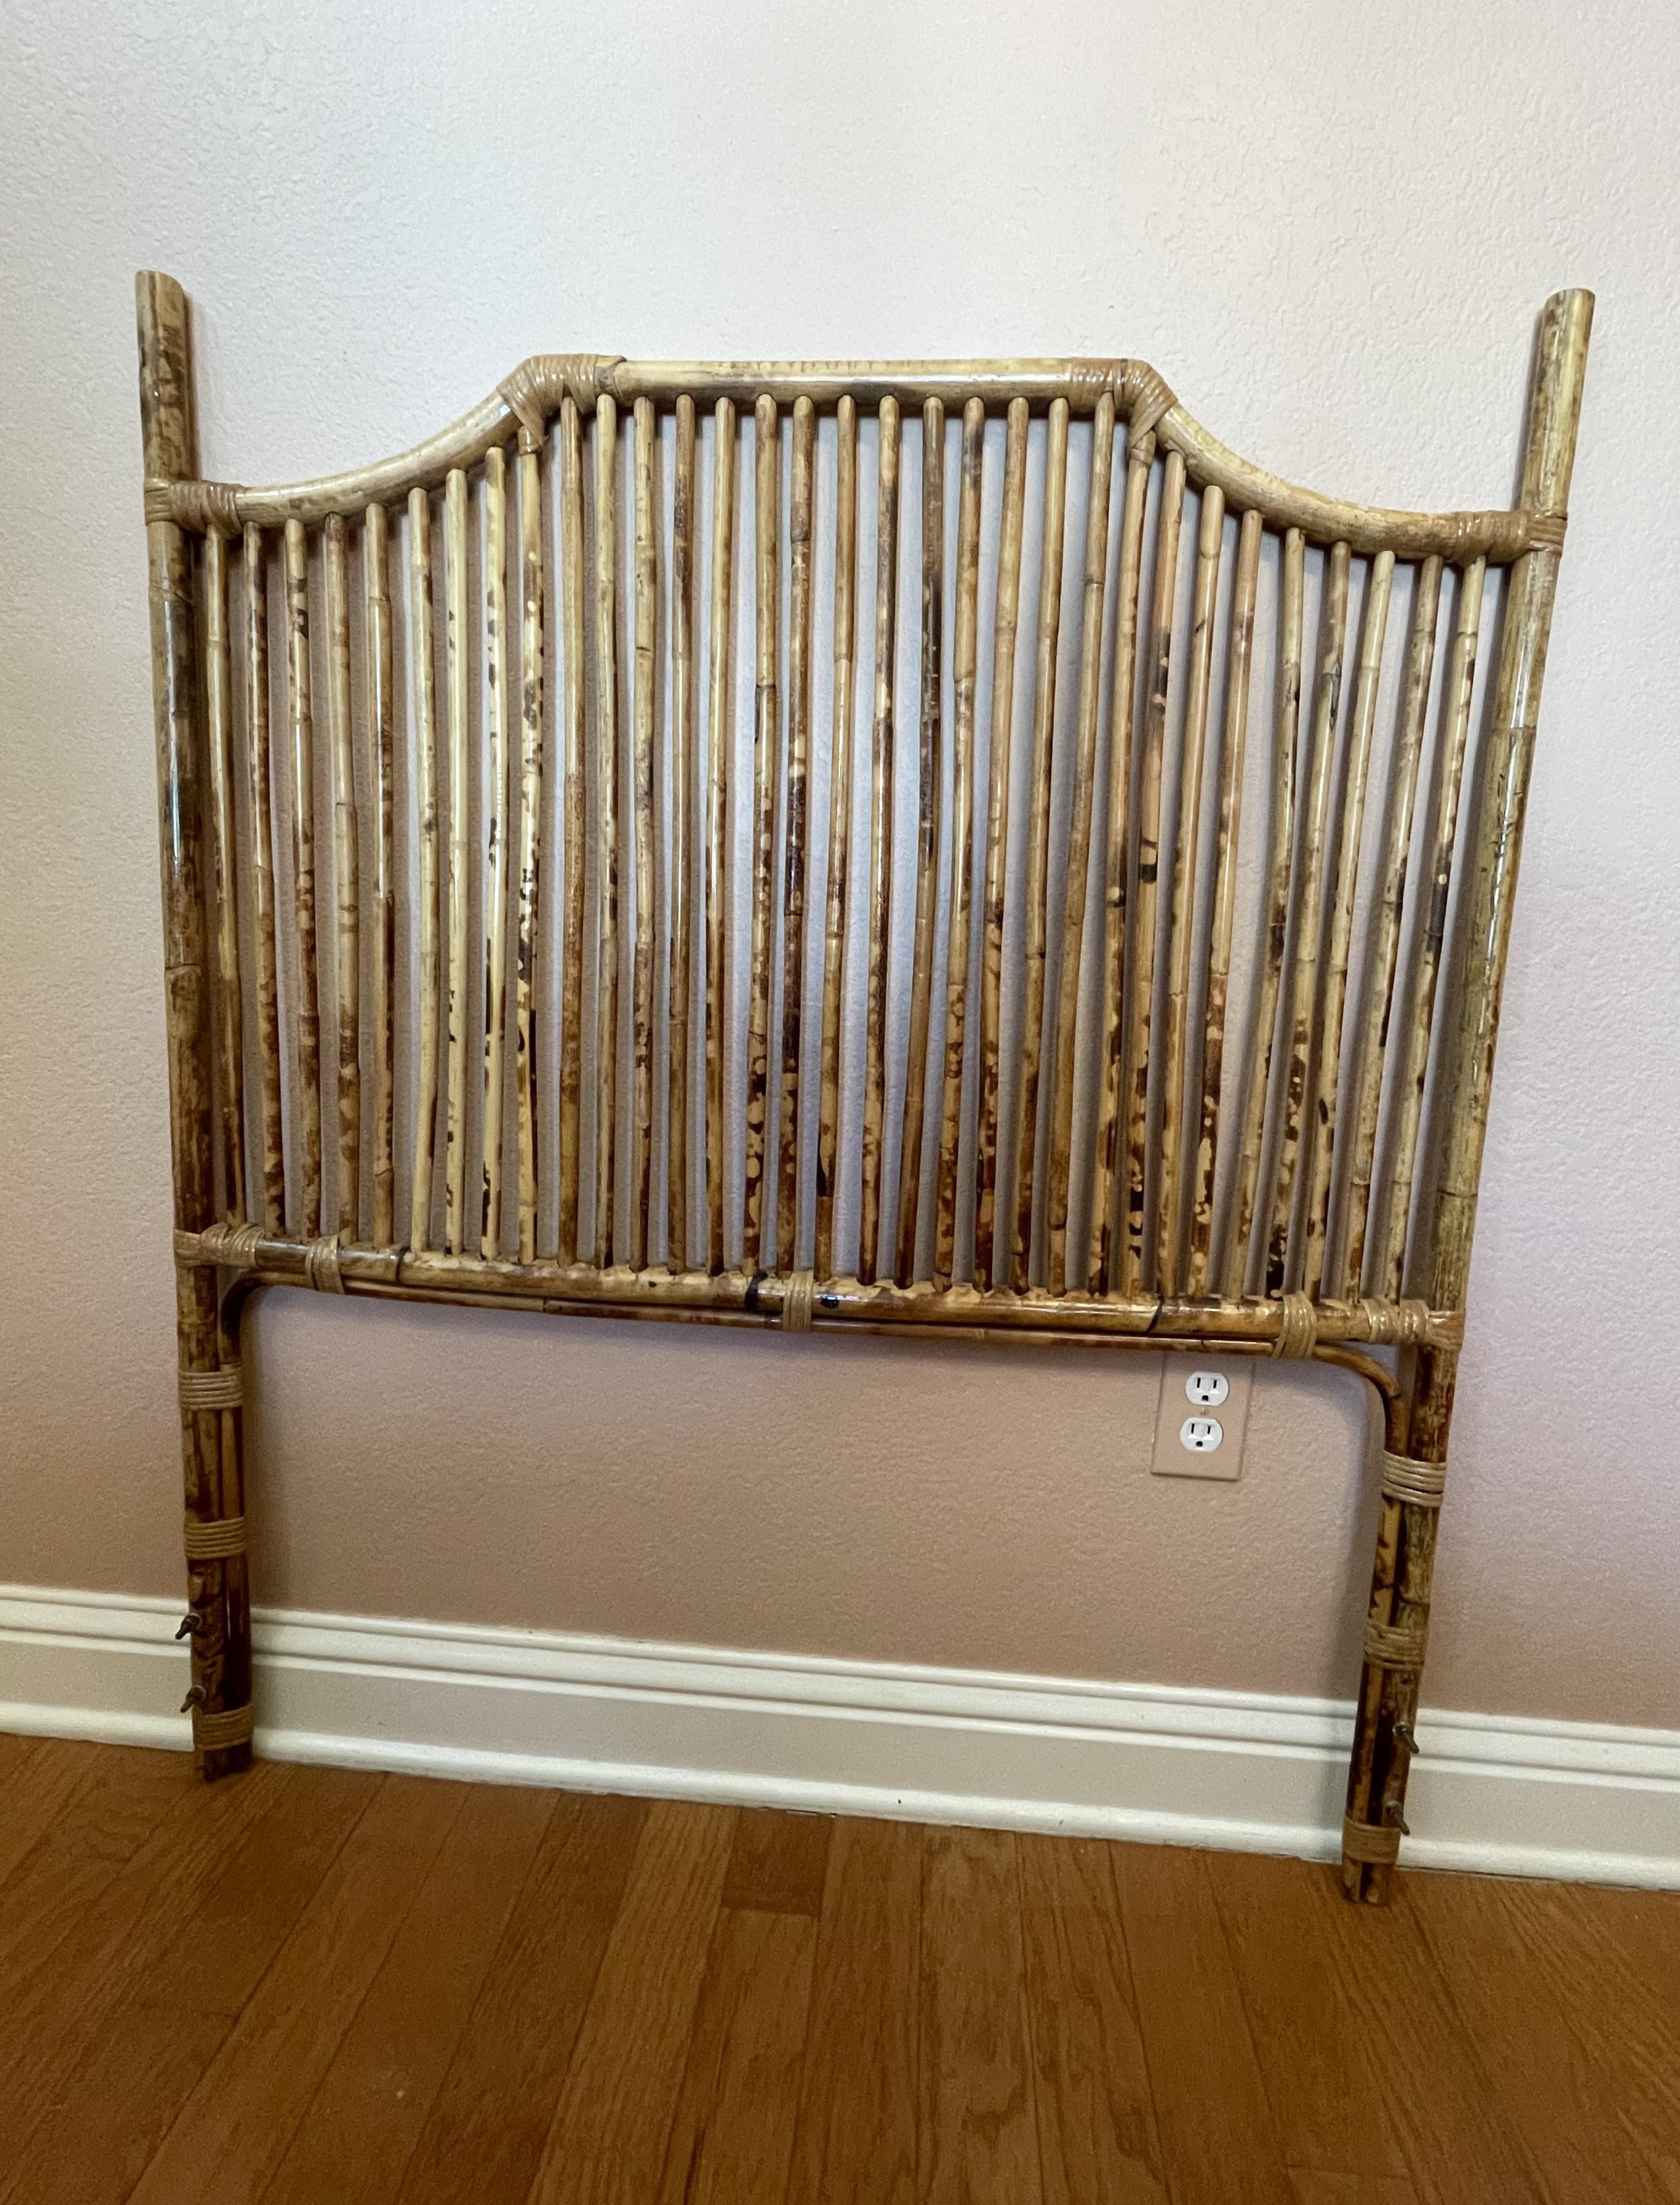 Hand-Crafted Mid-20th Century Tortoise-Bamboo and Rattan Headboards -- A Pair For Sale